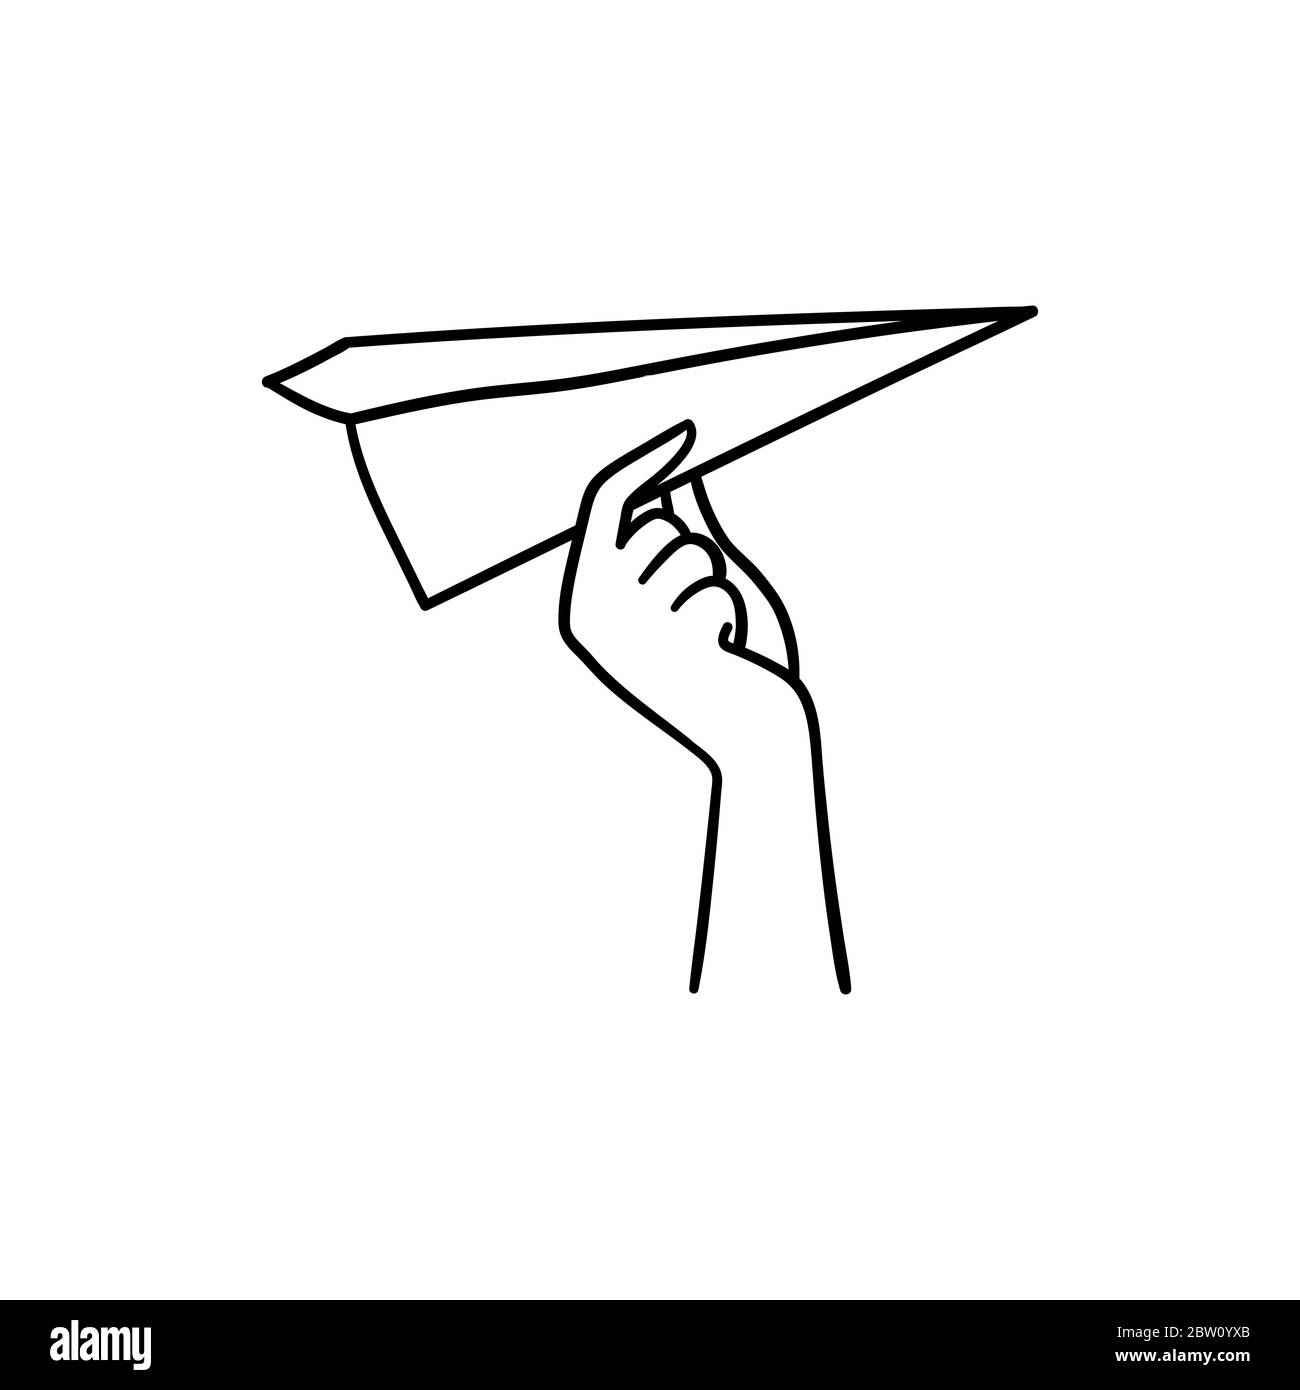 Doodle style hand holding paper plane and trying to launch it - isolated vector illustation on white background Stock Vector